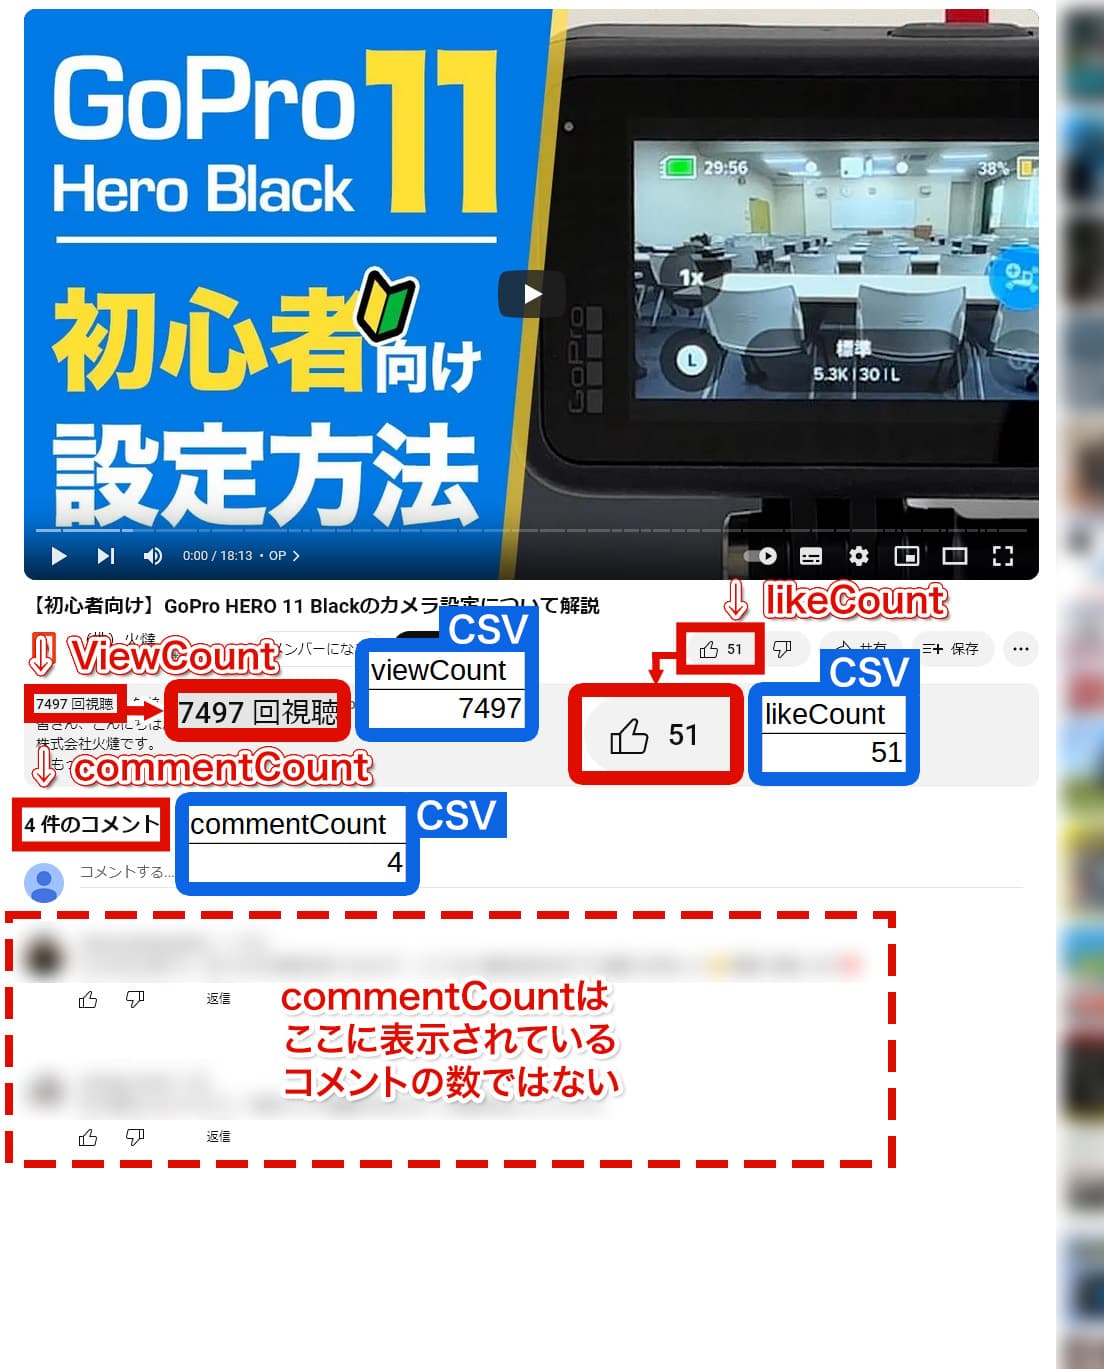 YouTube動画ページの ViewCount、likeCount、commentCount